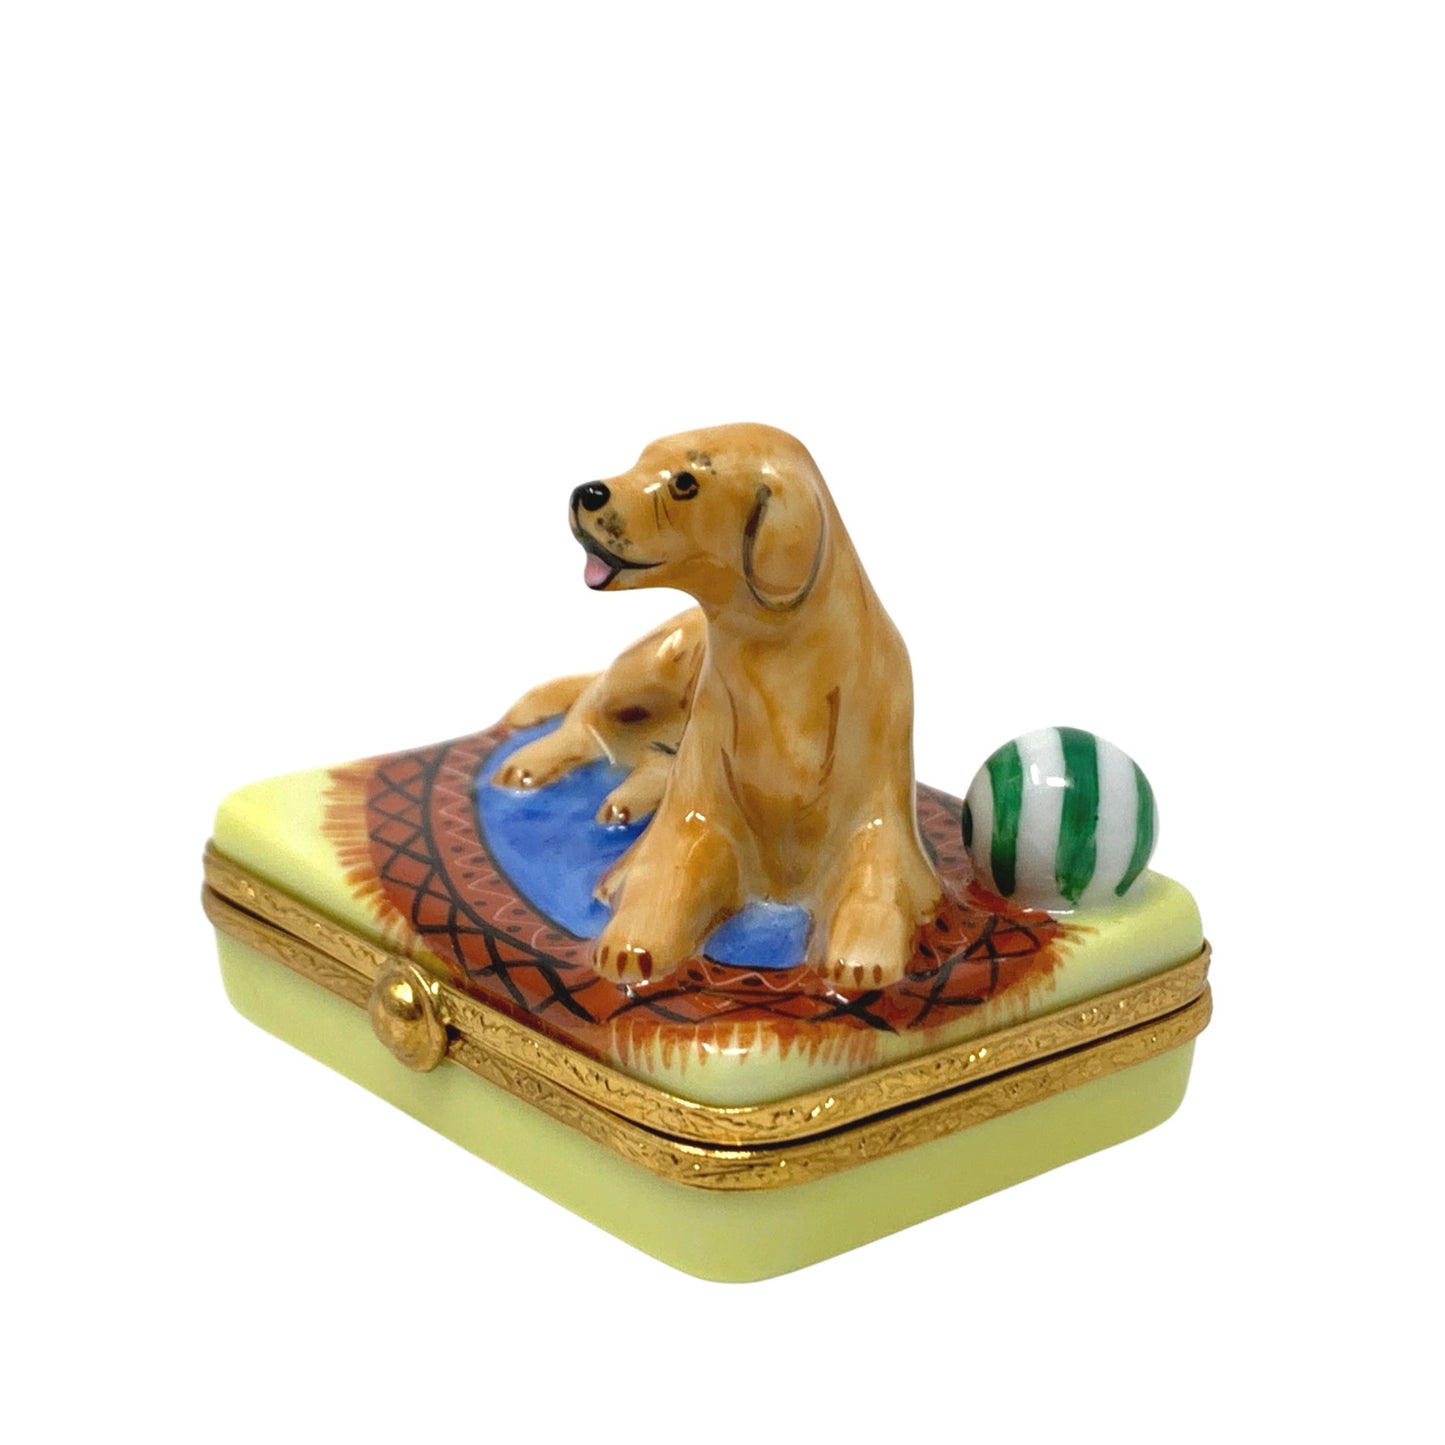 Limoges France Hand Painted by Artoria Golden Retriever Trinket Box